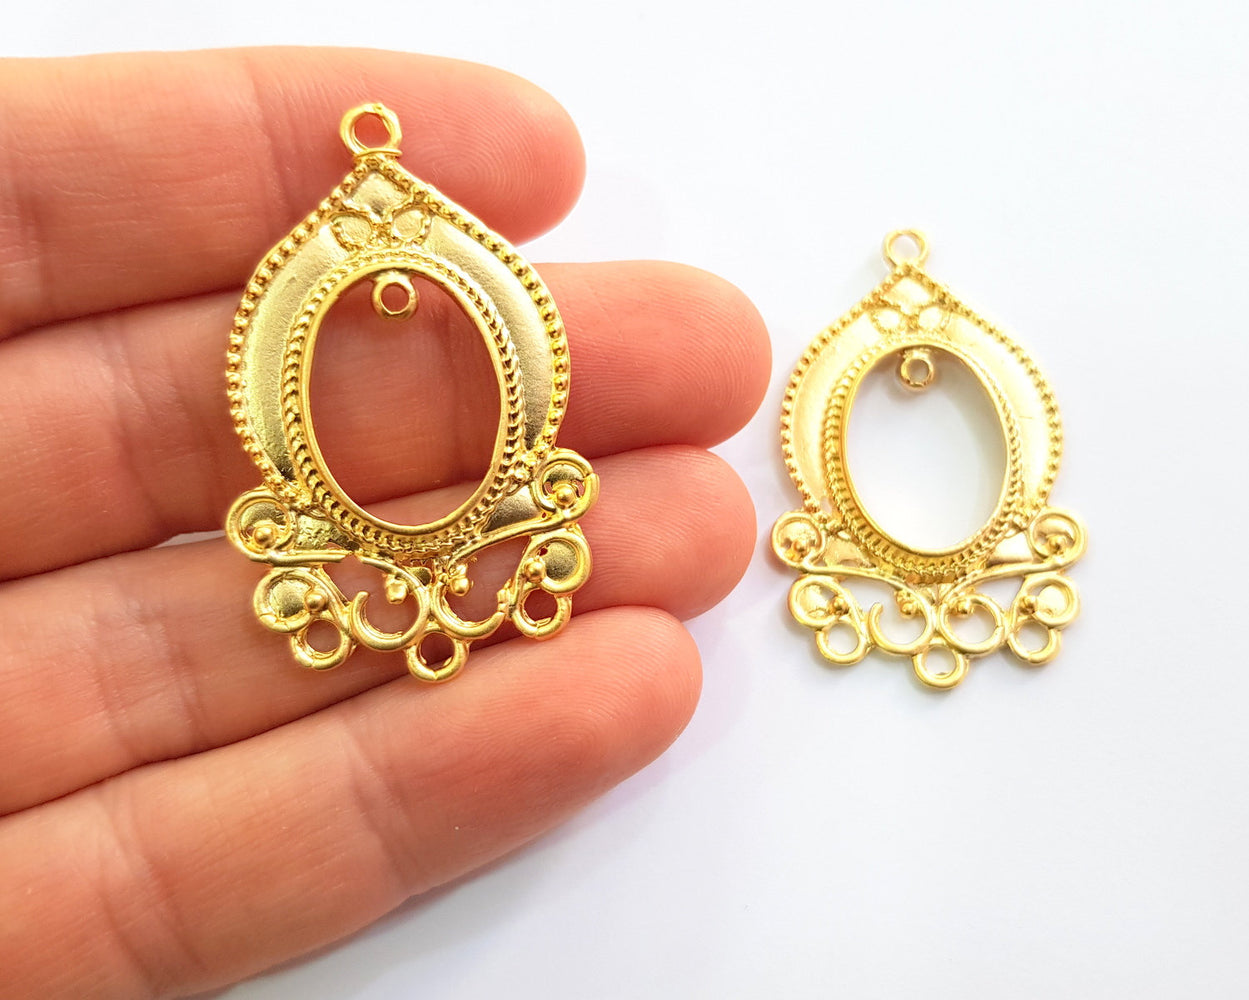 2 Gold Charms Gold Plated Charms  (44x28mm)  G17063